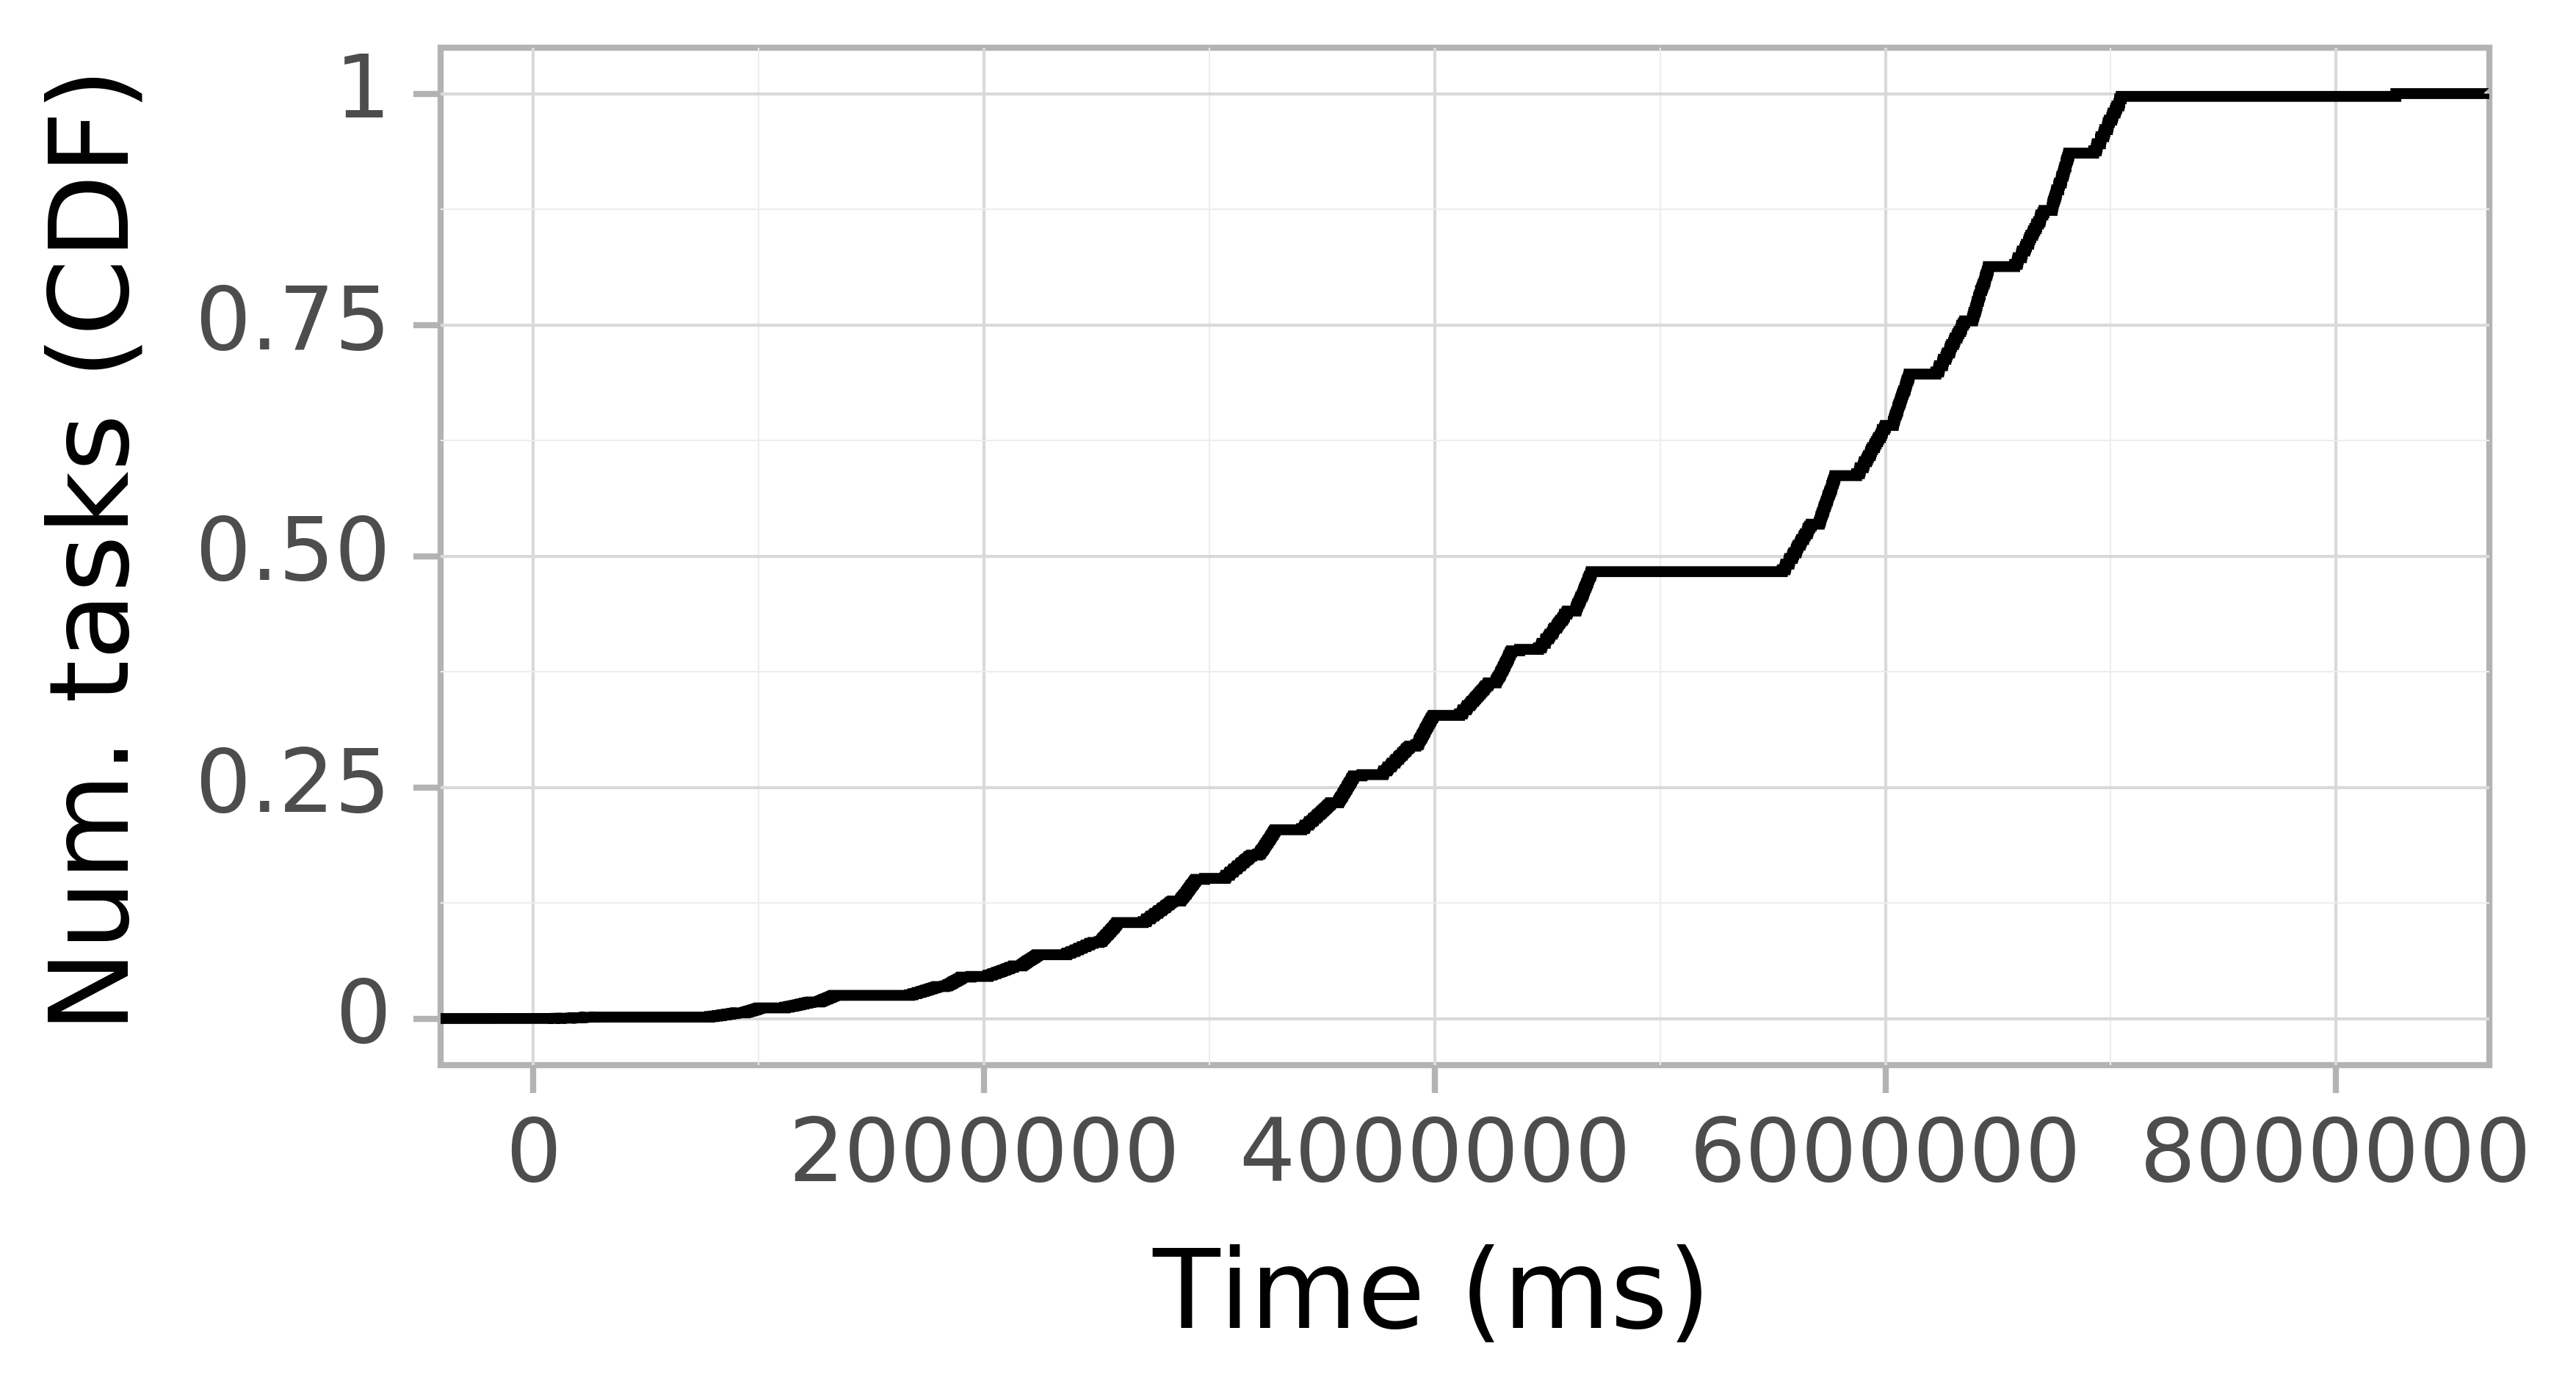 Task arrival CDF graph for the askalon-new_ee20 trace.